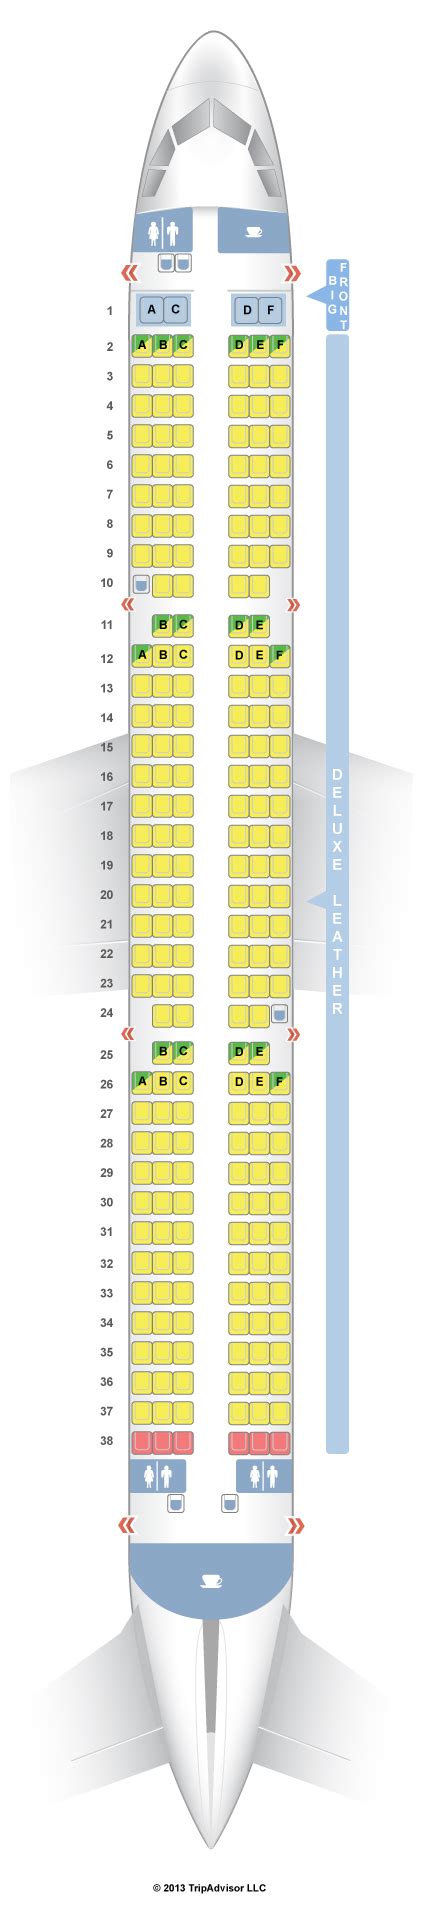 Spirit a321 seat map. Things To Know About Spirit a321 seat map. 